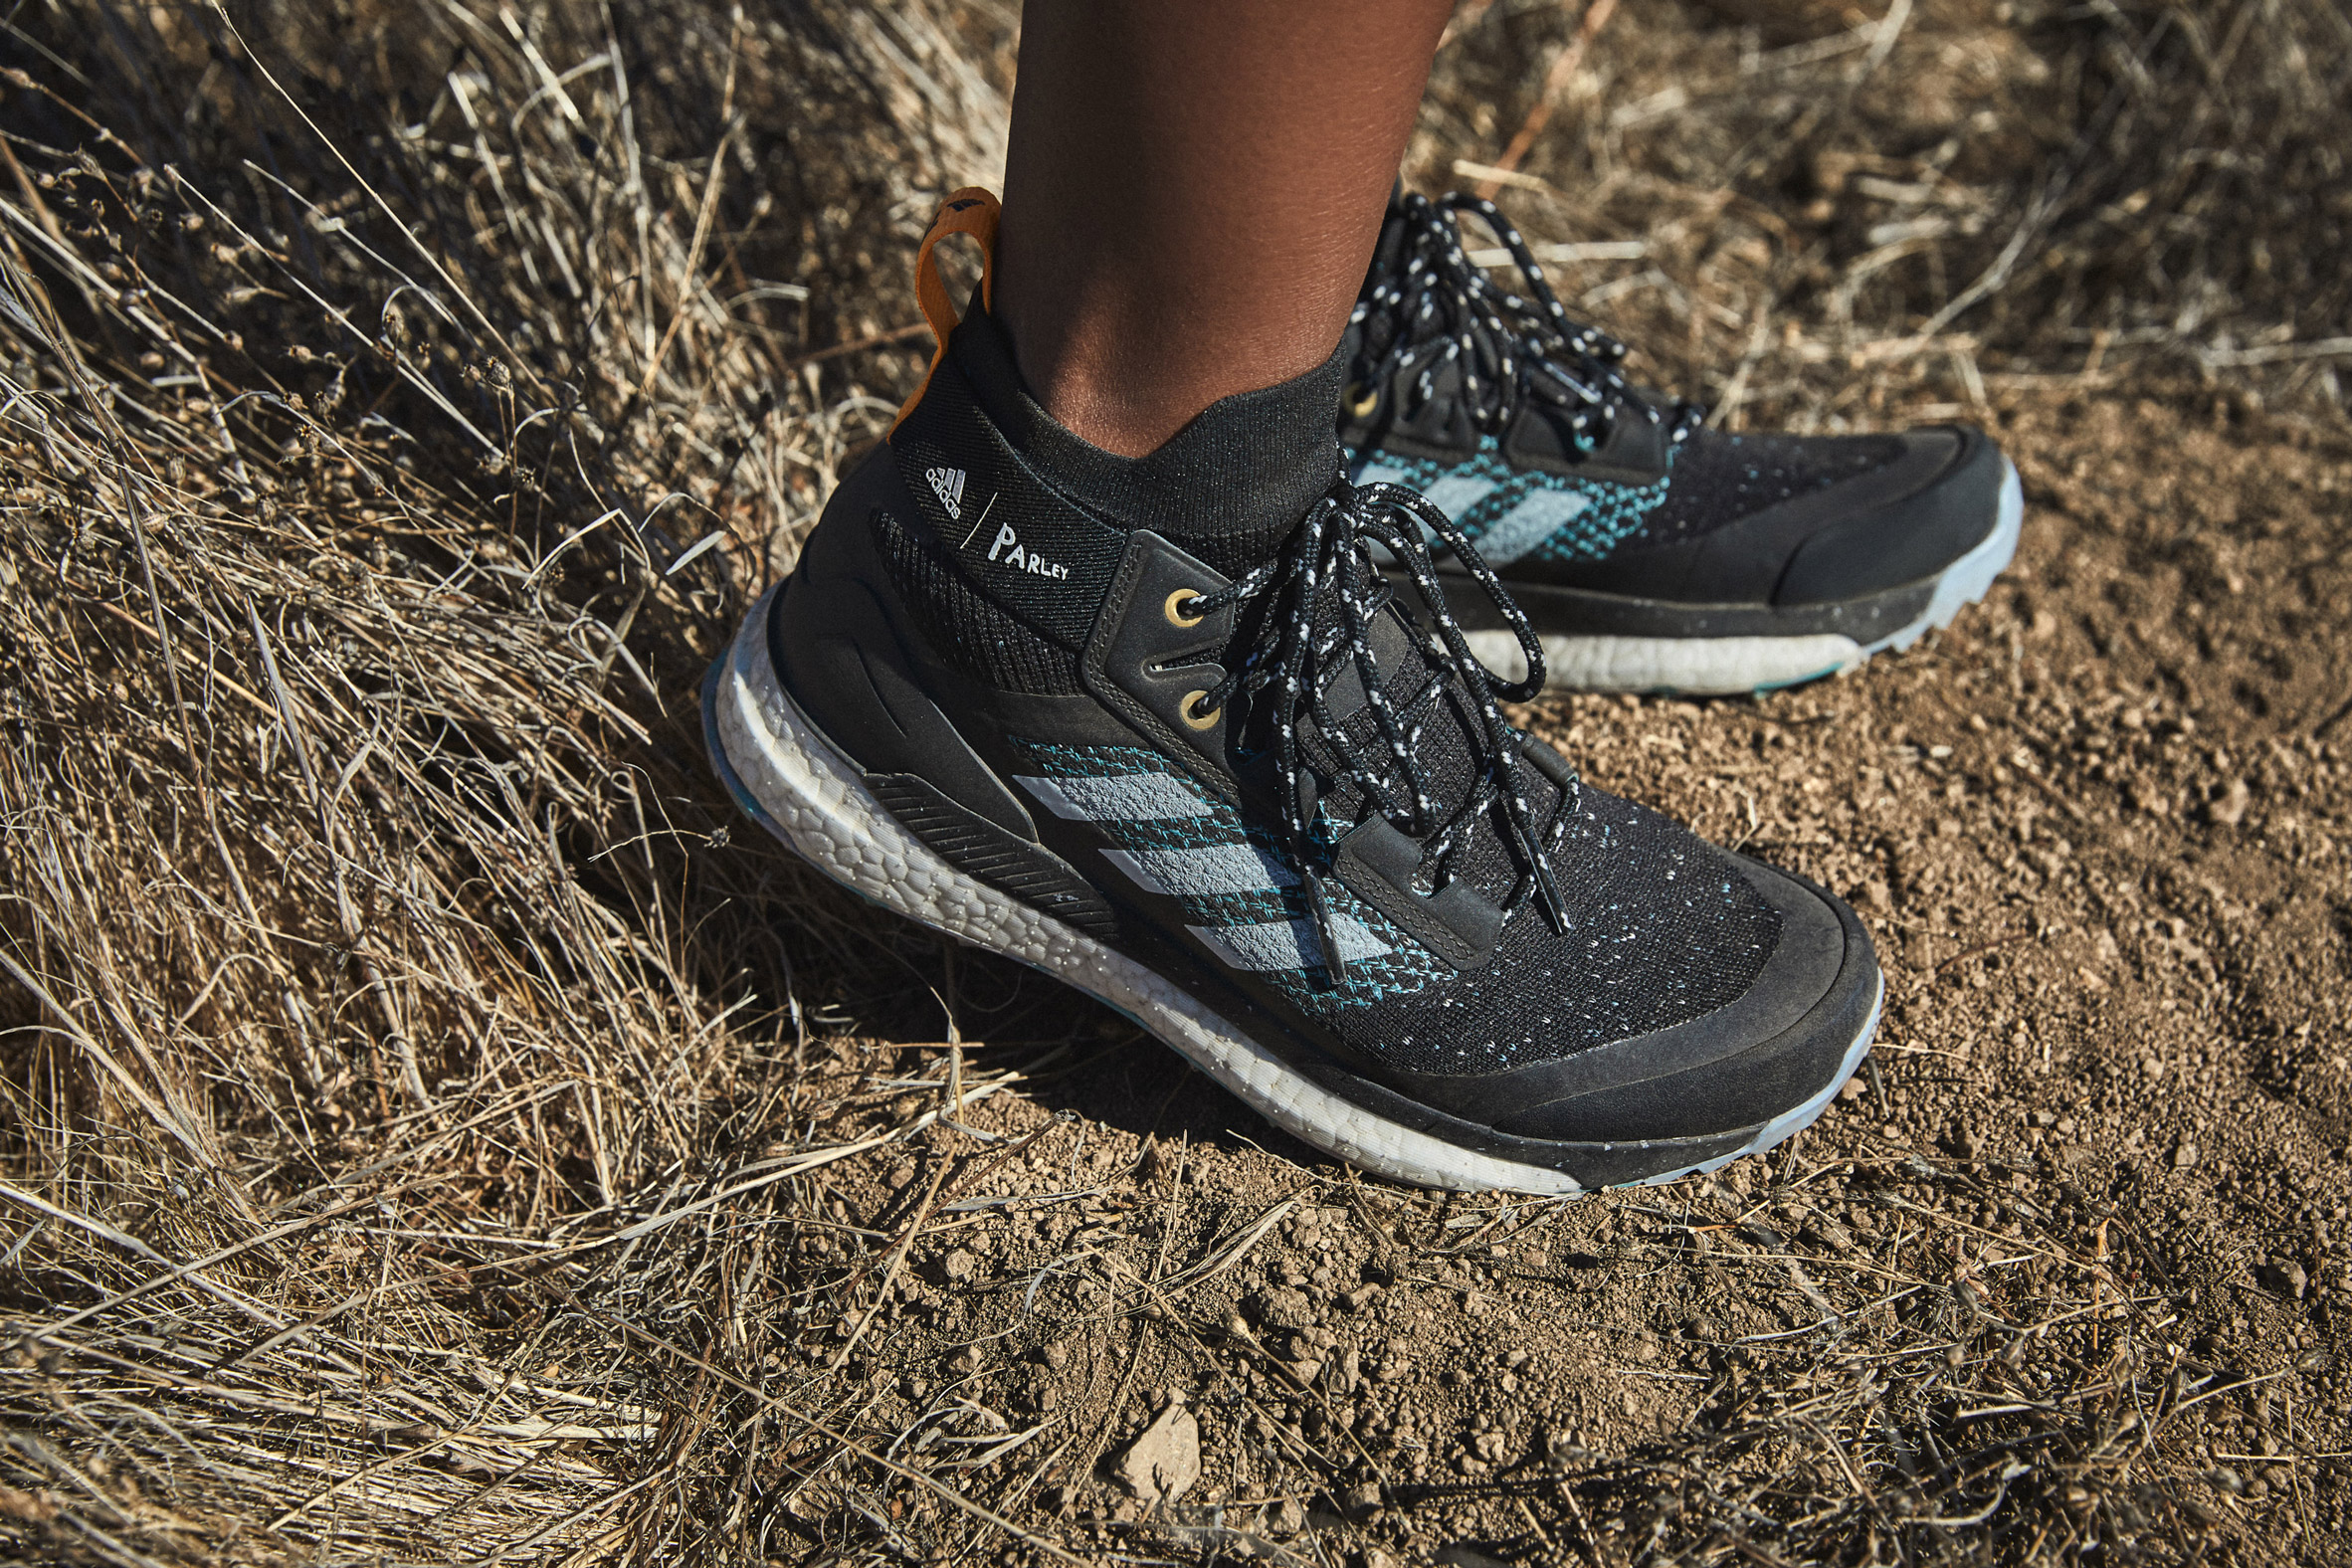 Adidas uses Parley ocean plastic for updated upper on its Terrex Free Hiker shoe